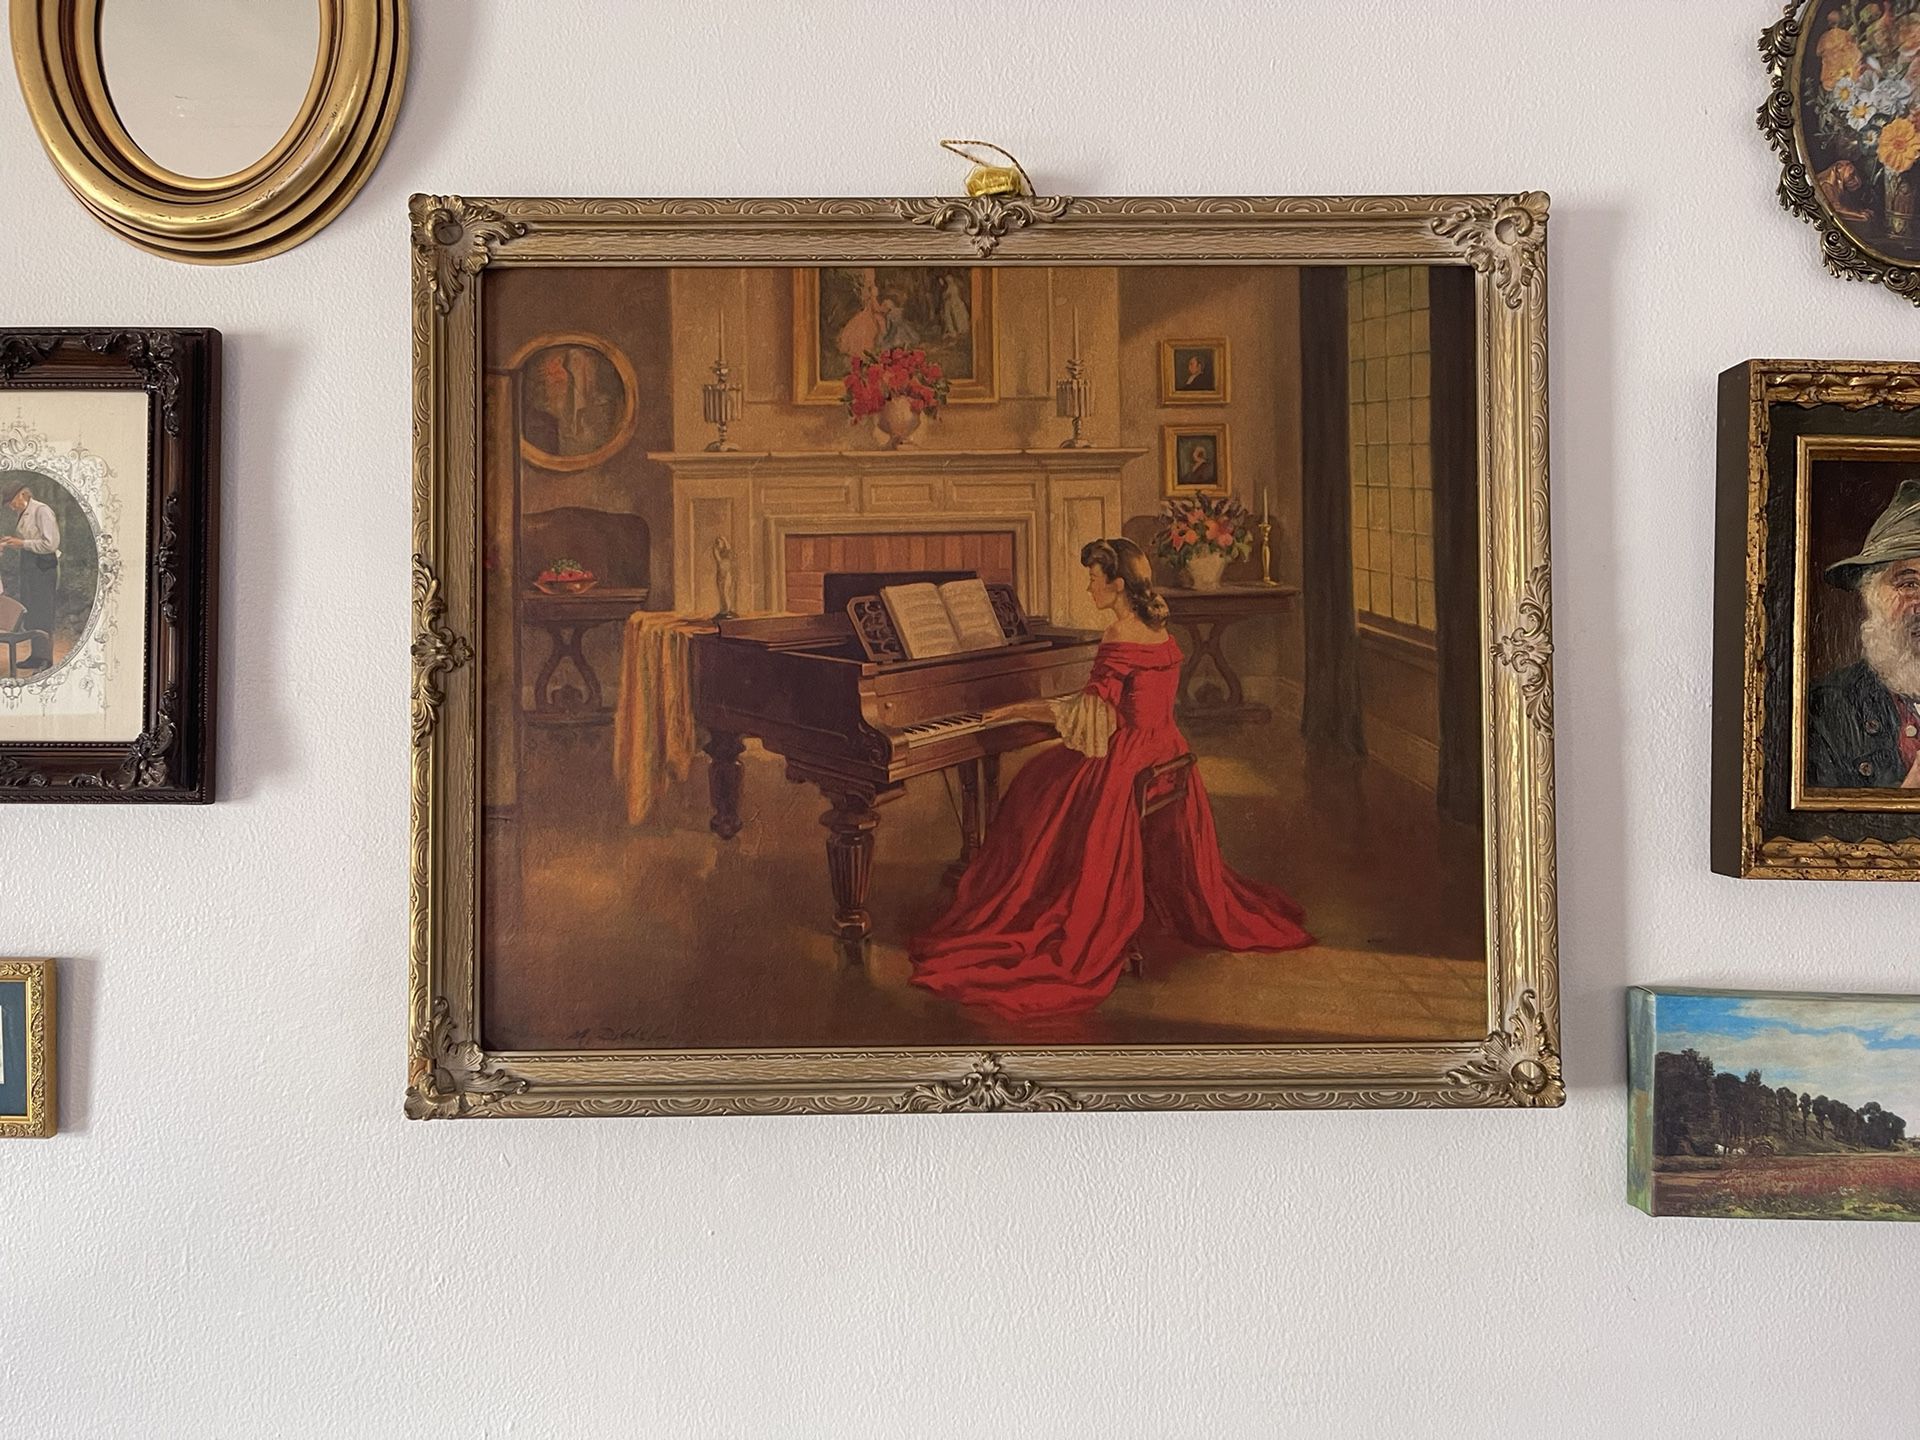 Antique Framed Wall Hanging Sonata TMCO Lithograph, of Painting By M. Ditlef Sonata Lady In Red Dress